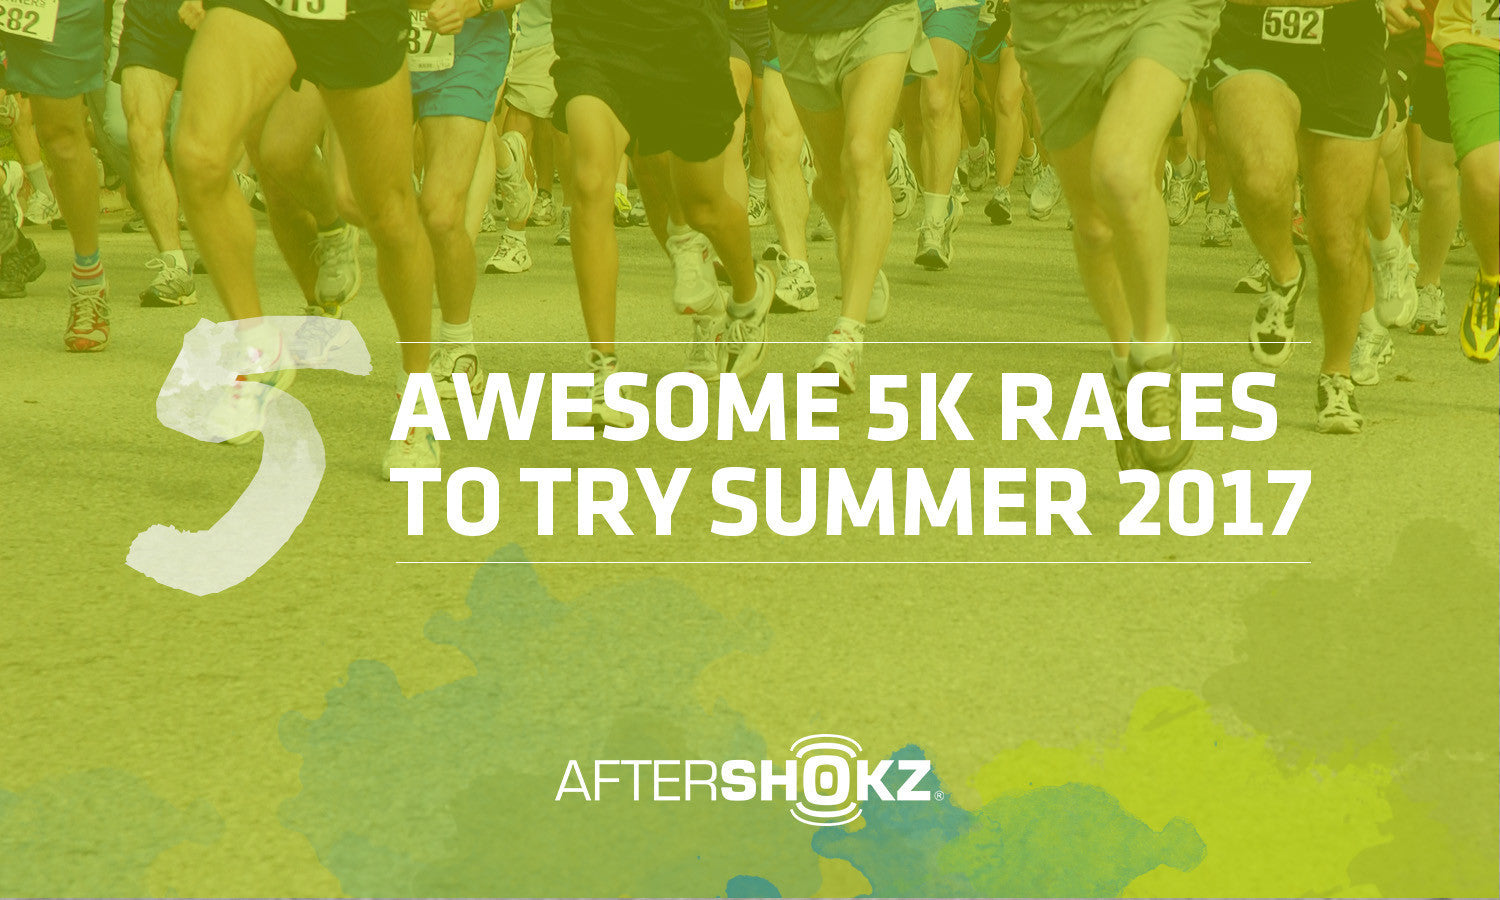 5 Awesome 5K Races To Try Summer 2017